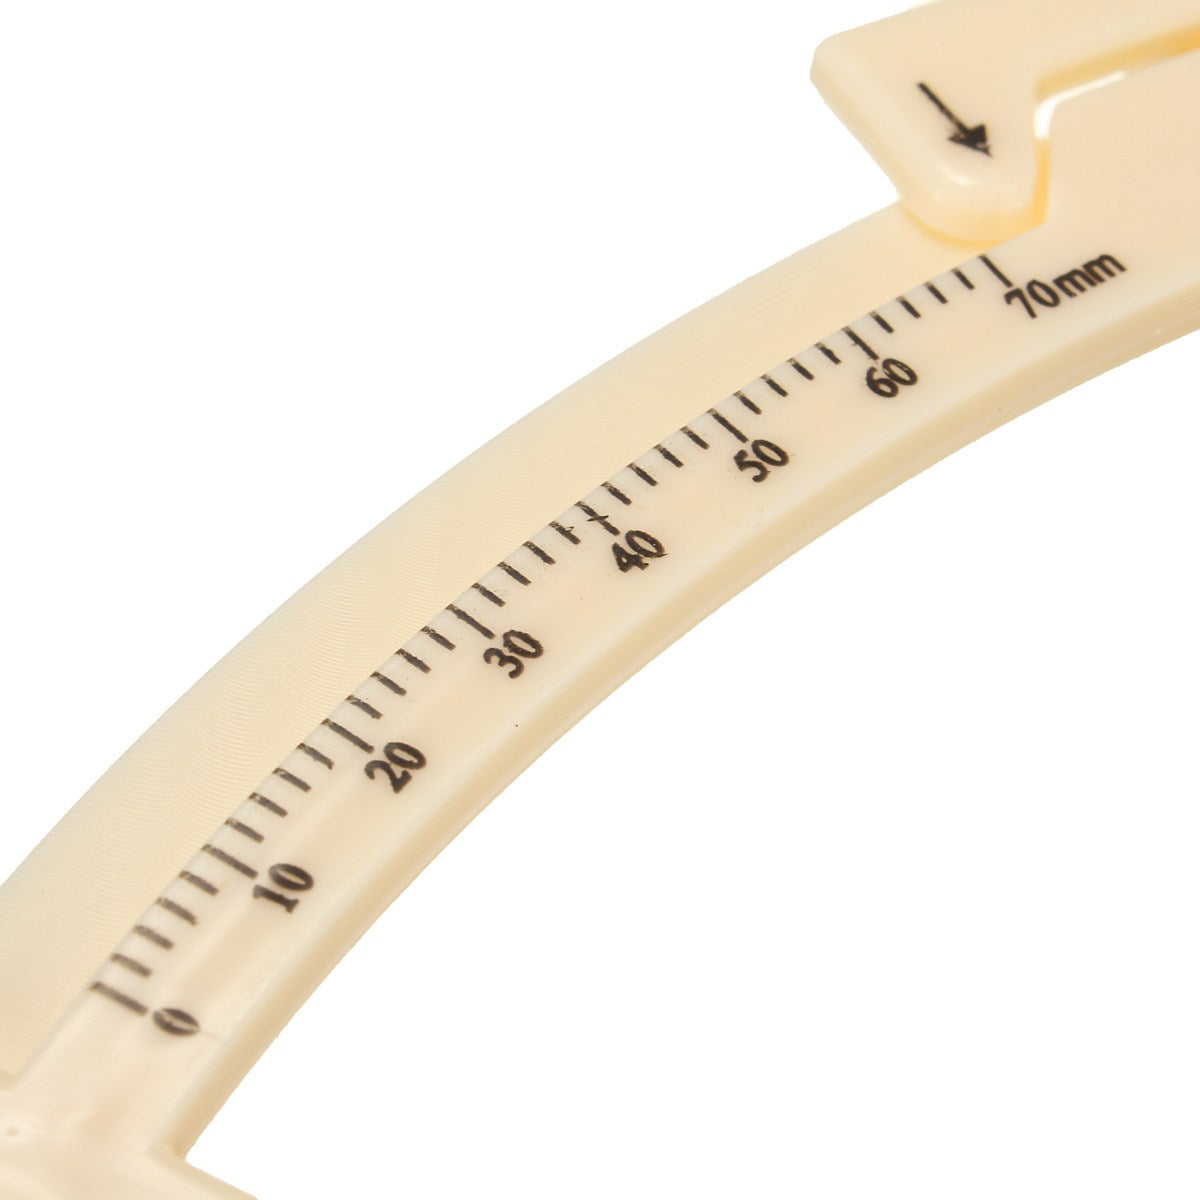 Caliper Body Fat Measuring Tool - Capital Elements 2 Wellness and Fitness